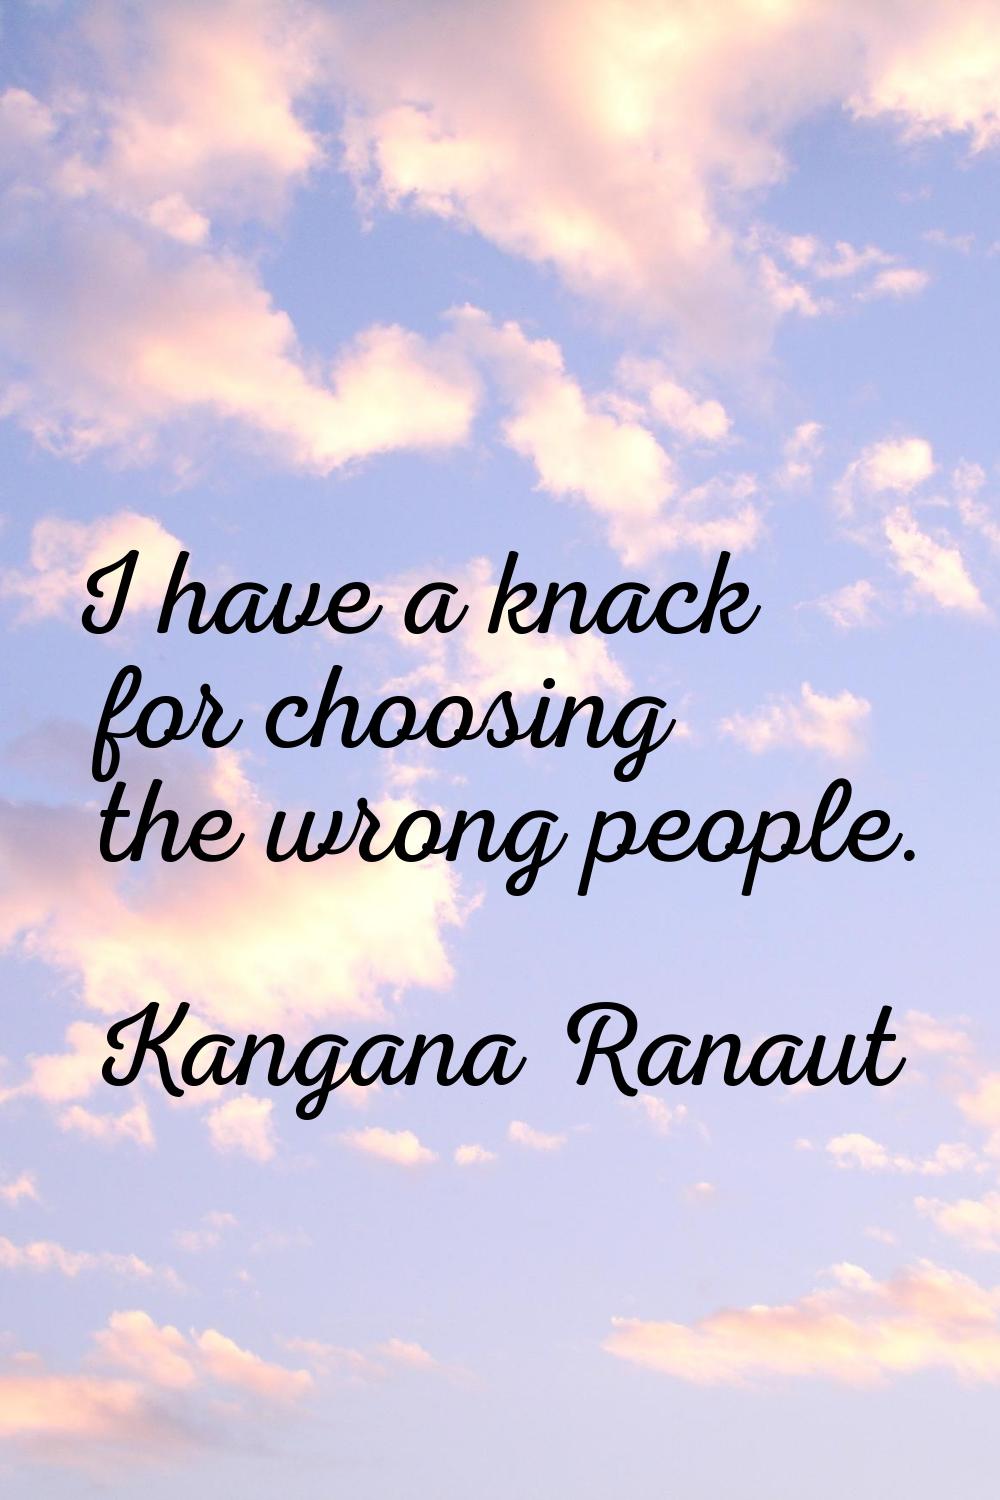 I have a knack for choosing the wrong people.